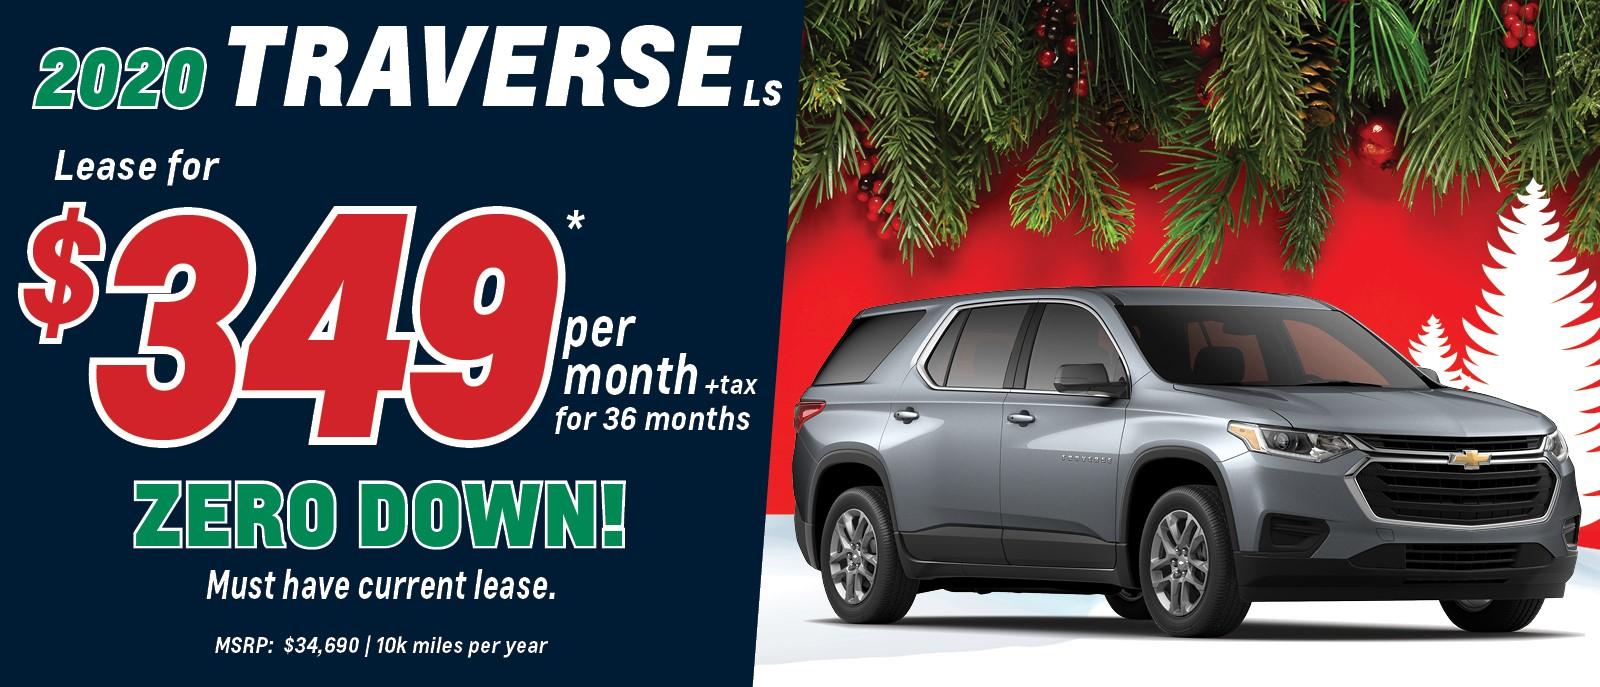 LEASE THE 2020 TRAVERSE FOR ONLY $349 PER MONTH!